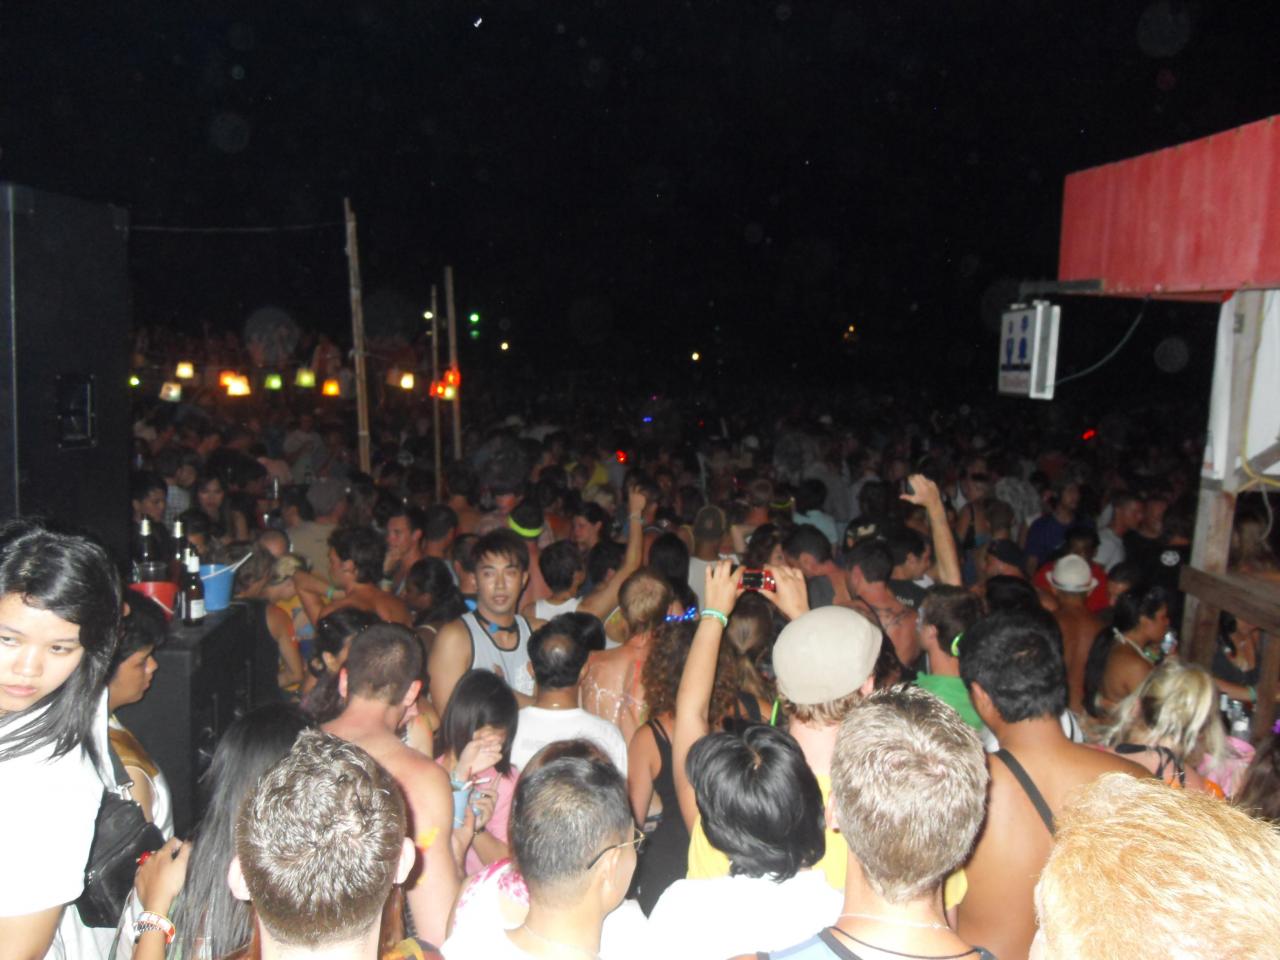 Haad Rin Full Moon Party, trying to get down to beach